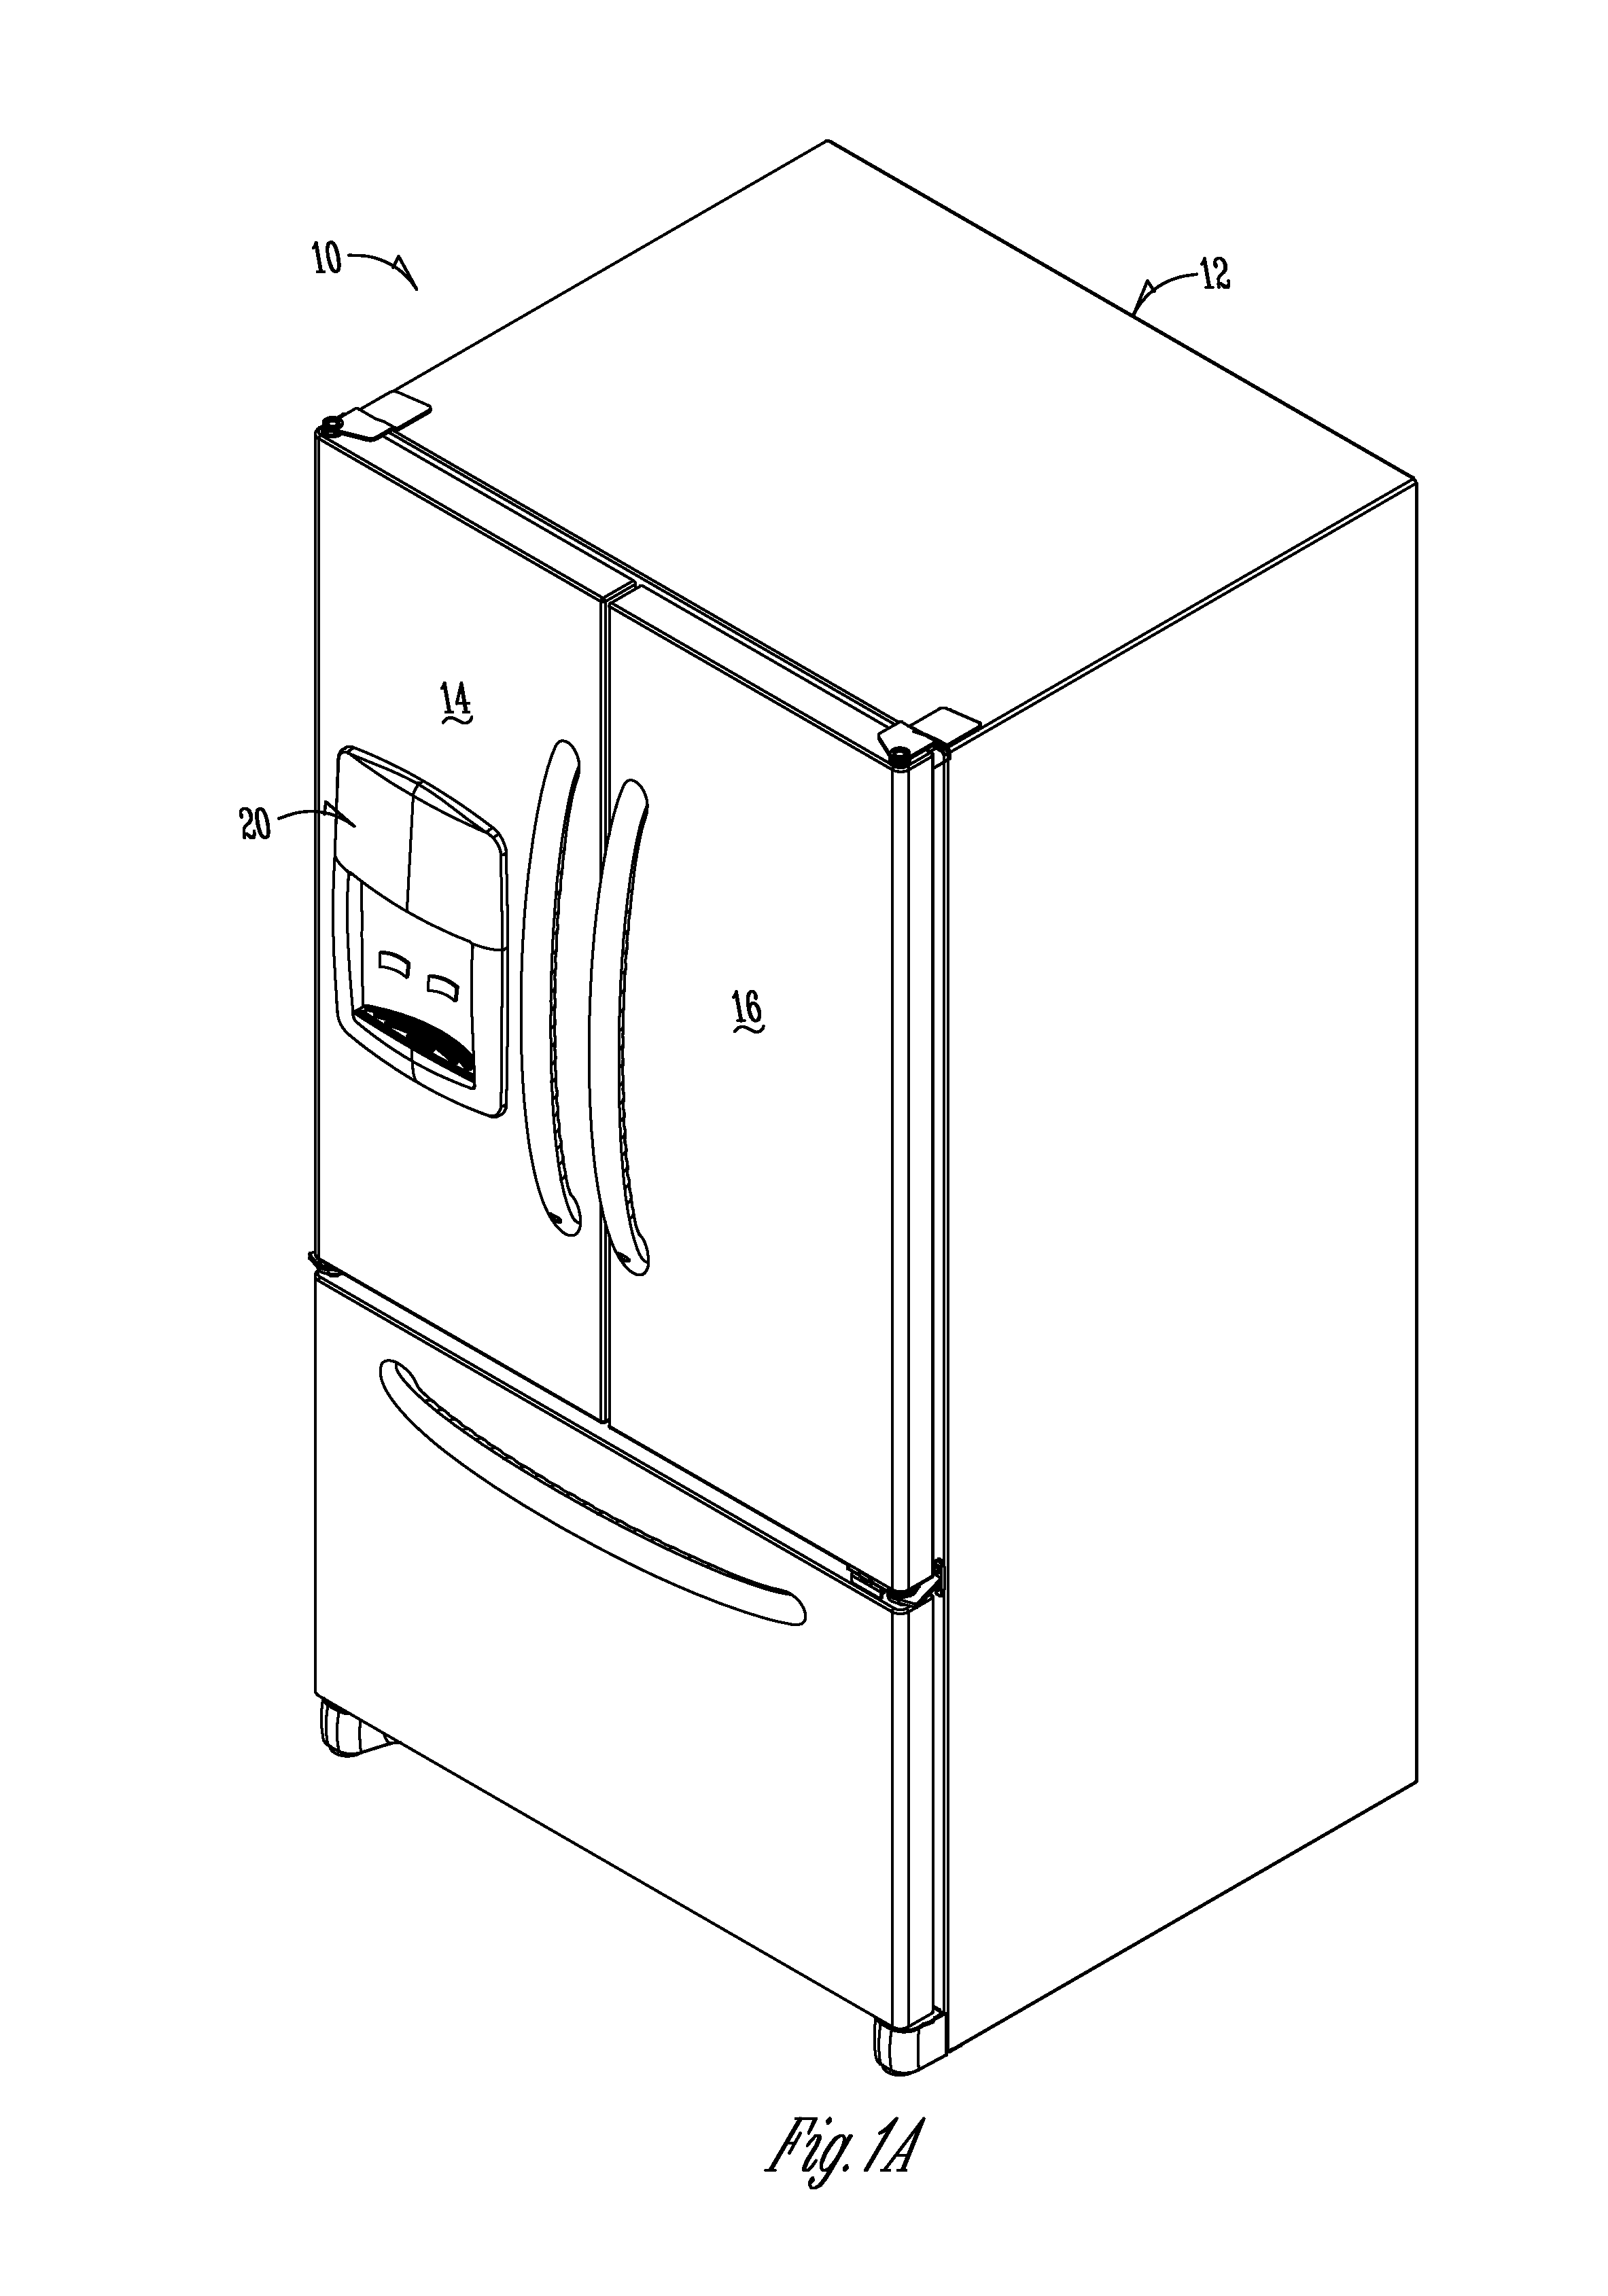 Two-plane door for refrigerator compartment